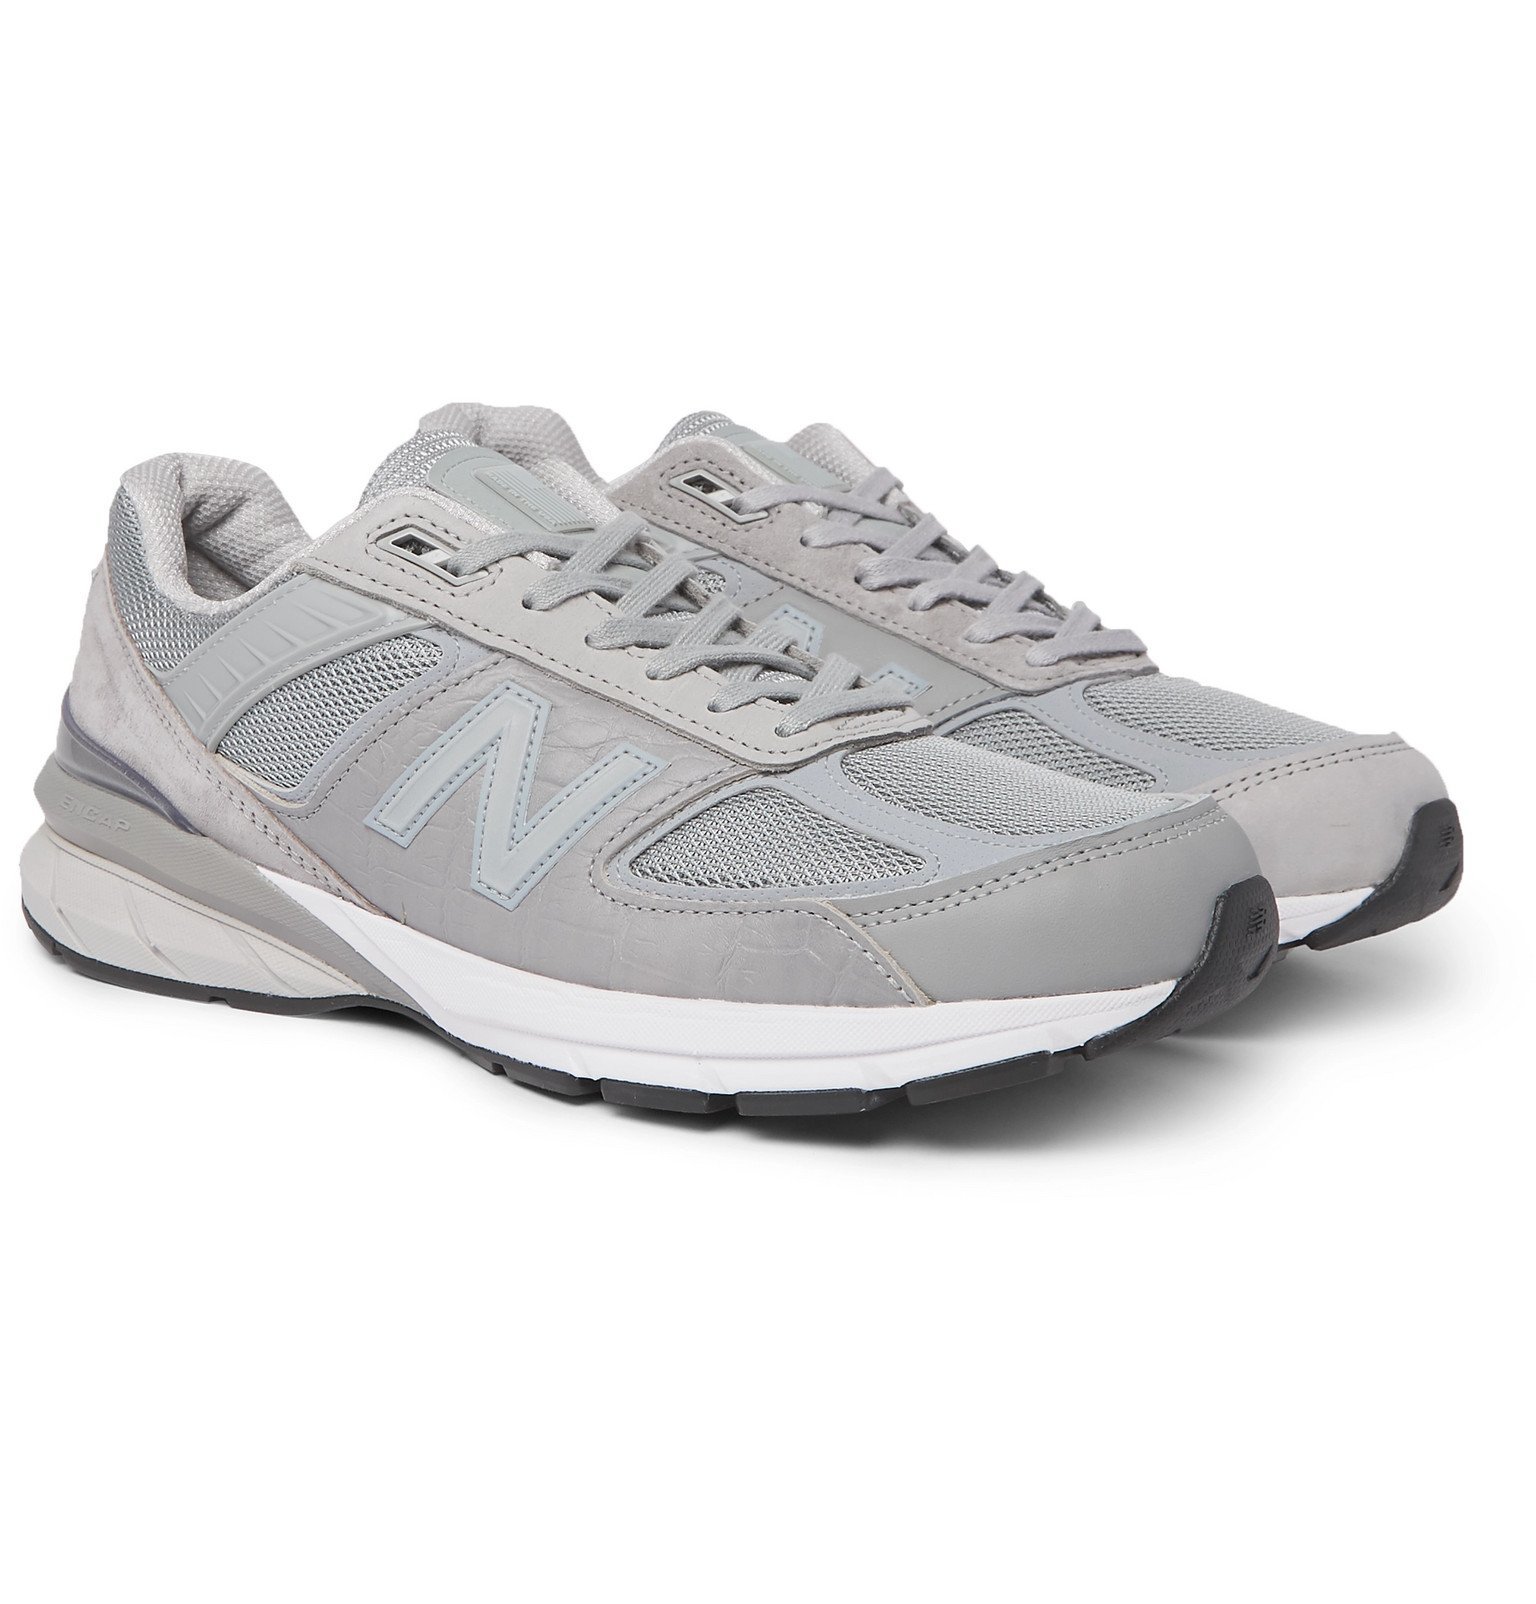 New Balance - Engineered Garments 990v5 Croc-Effect Leather, Suede, Nubuck and Mesh Sneakers - Unknown